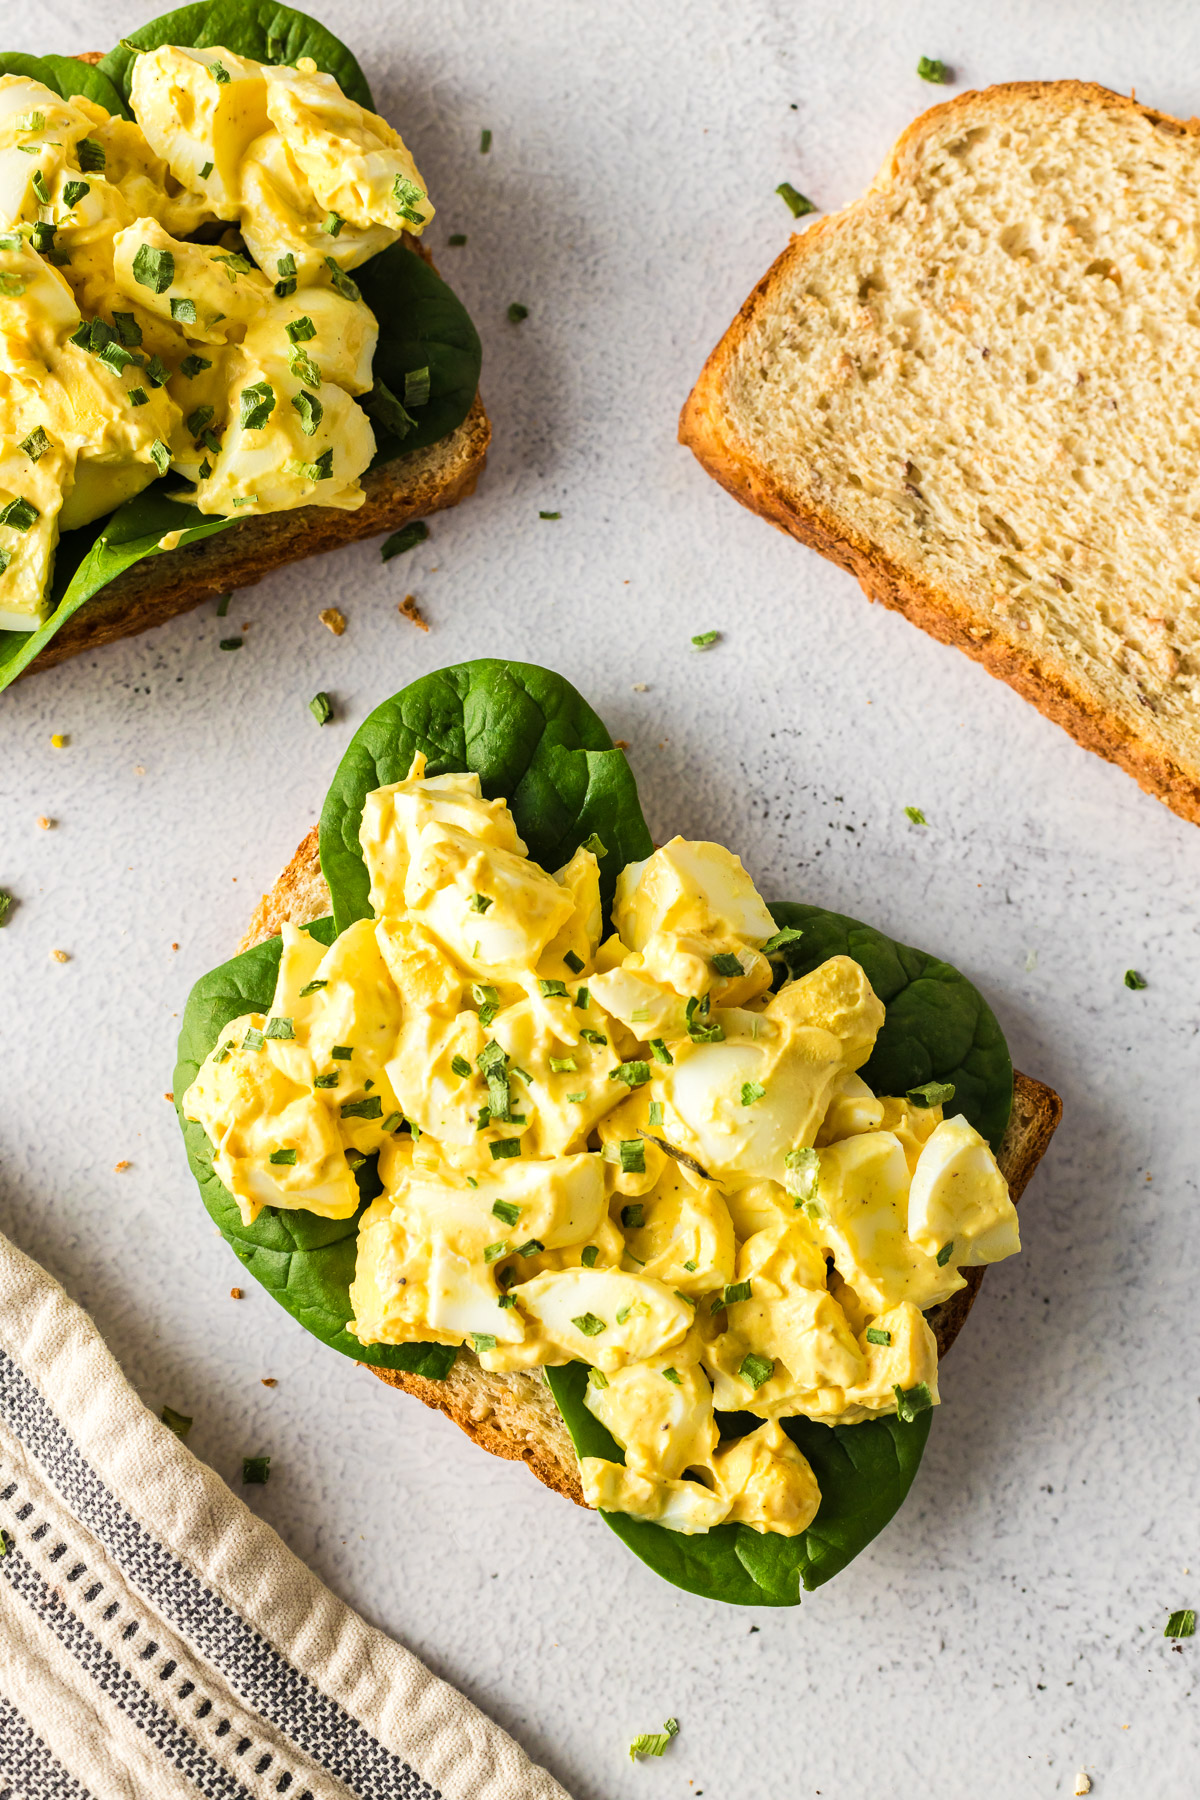 egg salad on wheat bread with spinach leaves